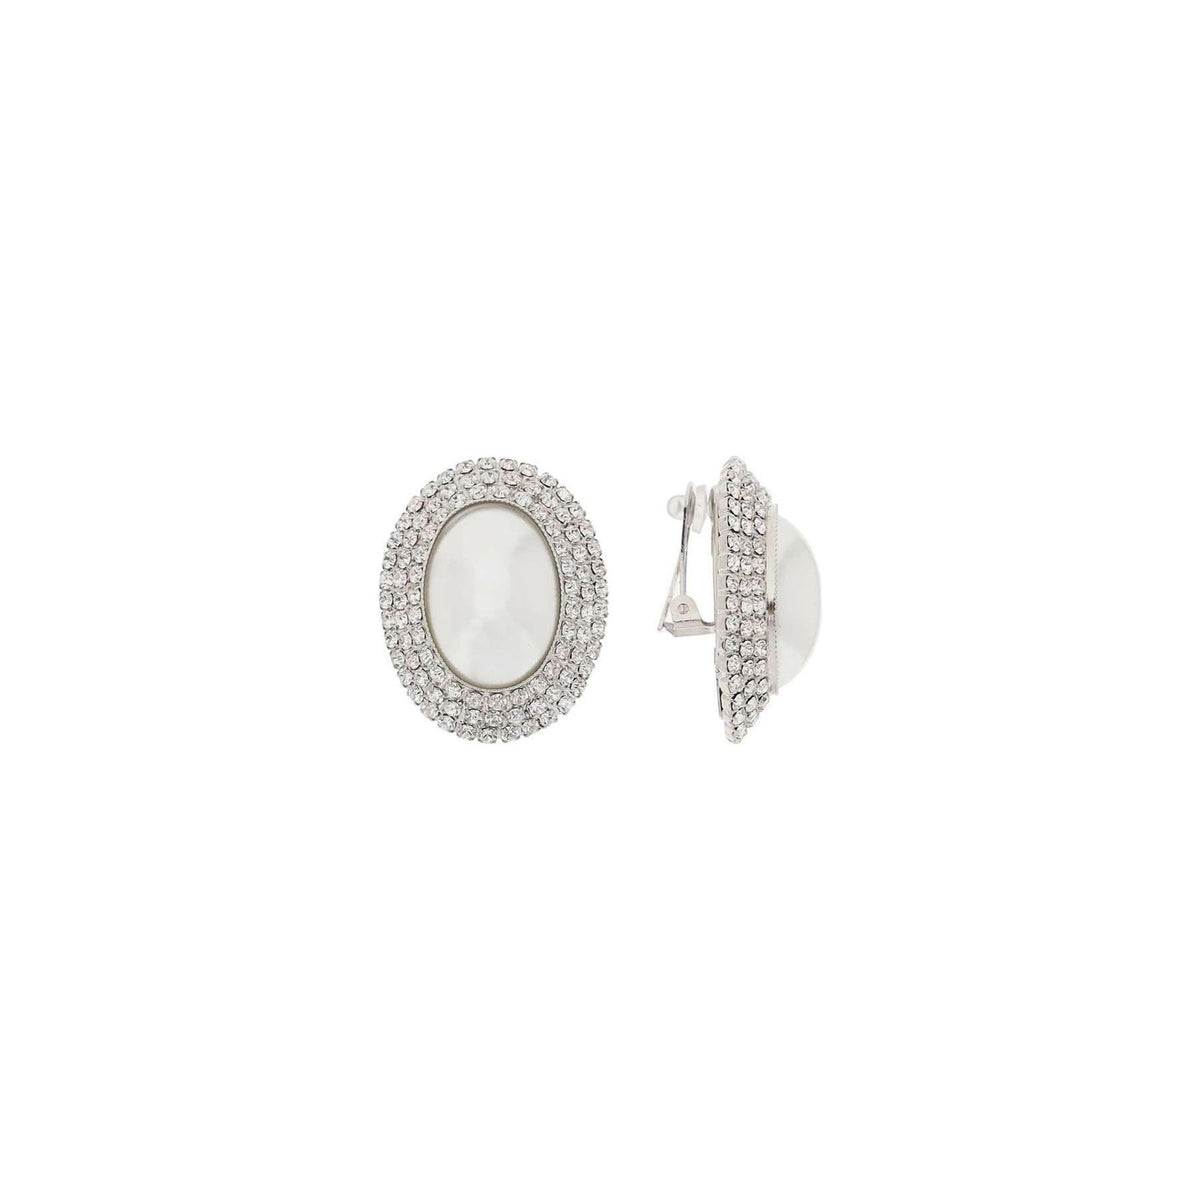 ALESSANDRA RICH - Oval Earrings With Pearl And Crystals - JOHN JULIA